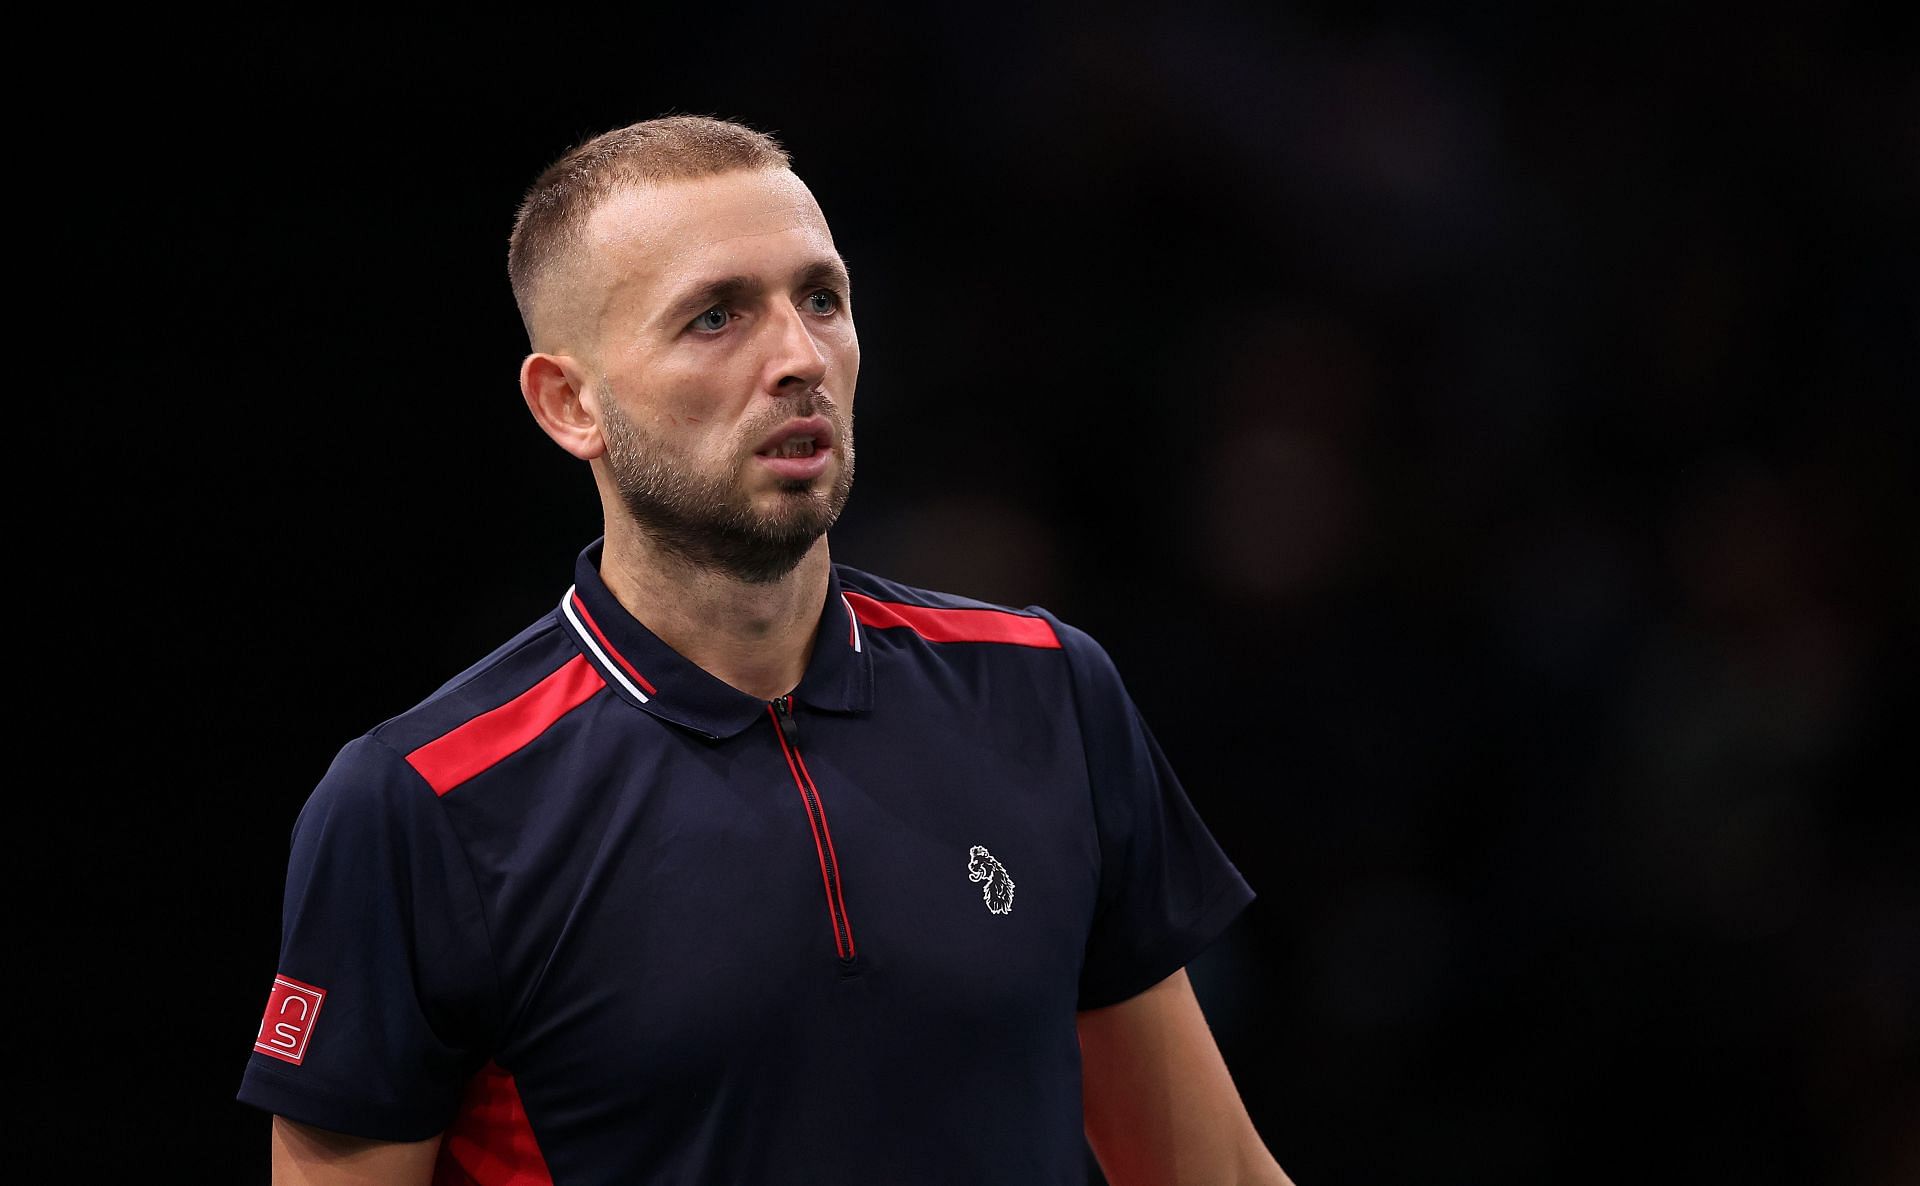 Dan Evans leads the English contingent at the Battle of the Brits.